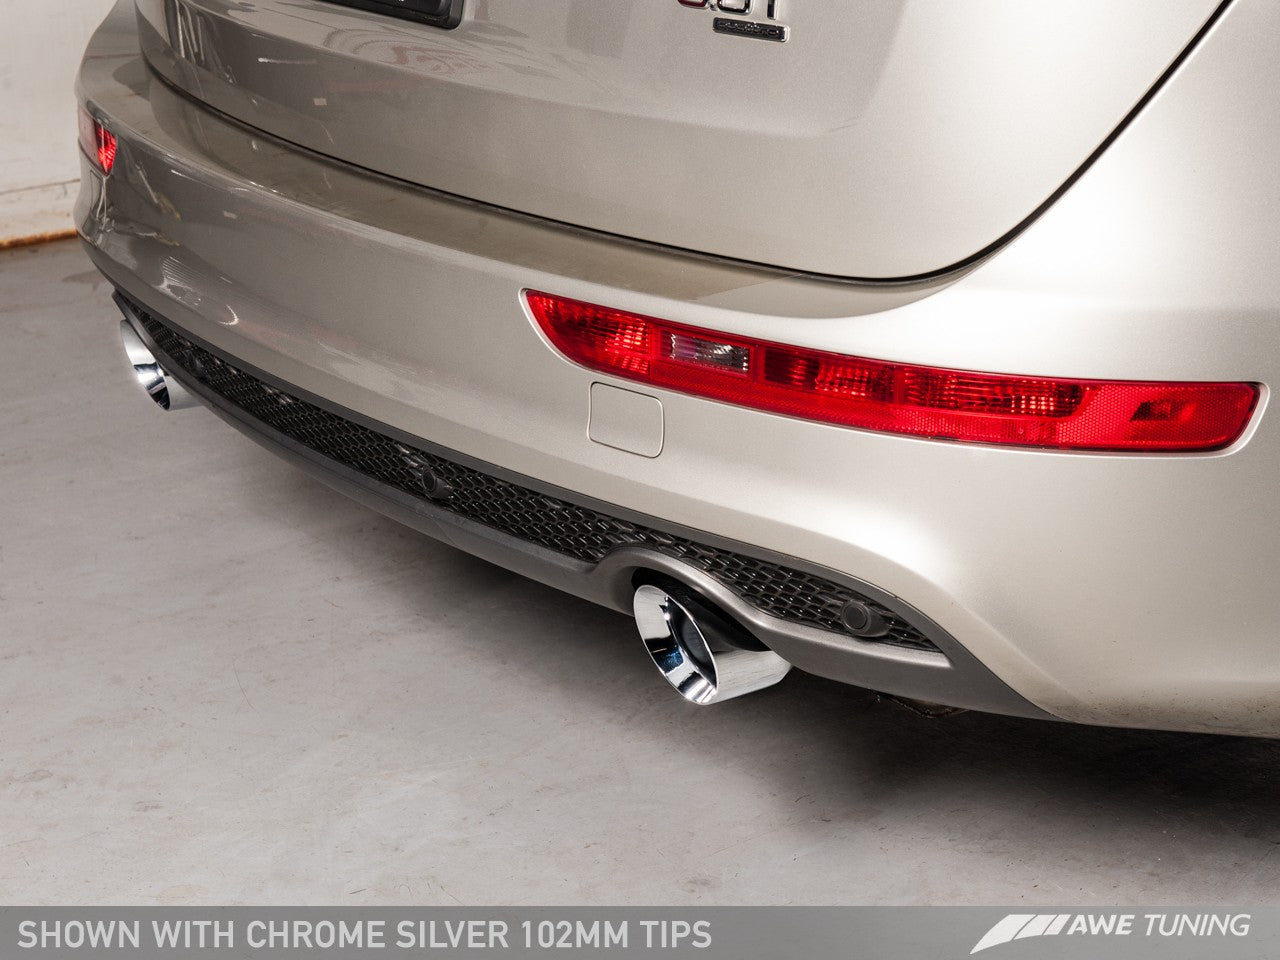 AWE Touring Edition Exhaust for 8R Q5 3.0T Dual Outlet, Chrome Silver Tips